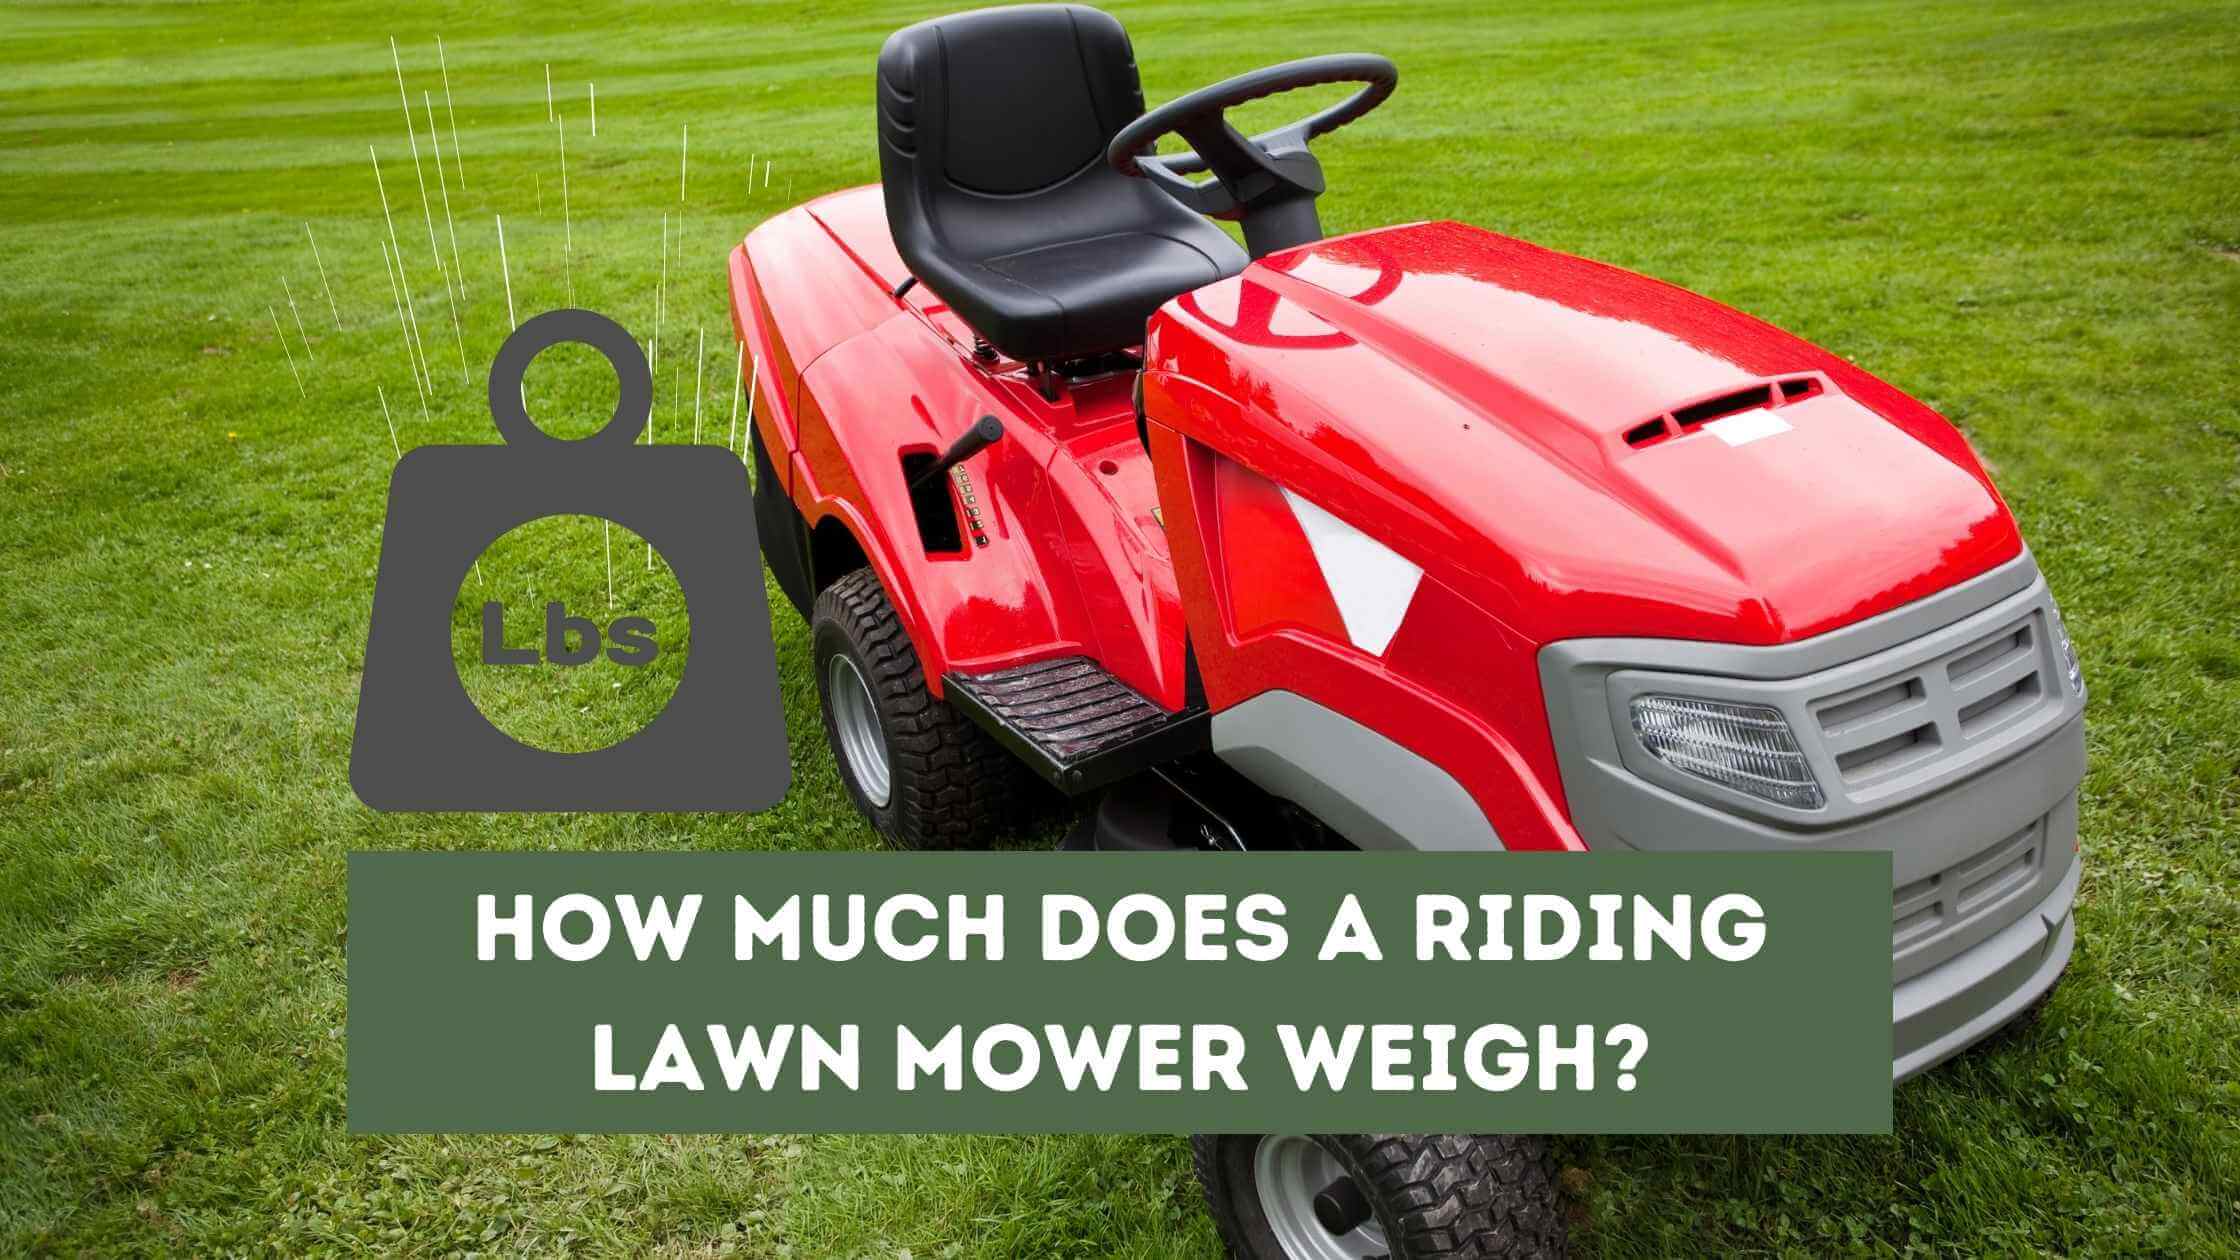 How Much Does a Riding Lawn Mower Weigh